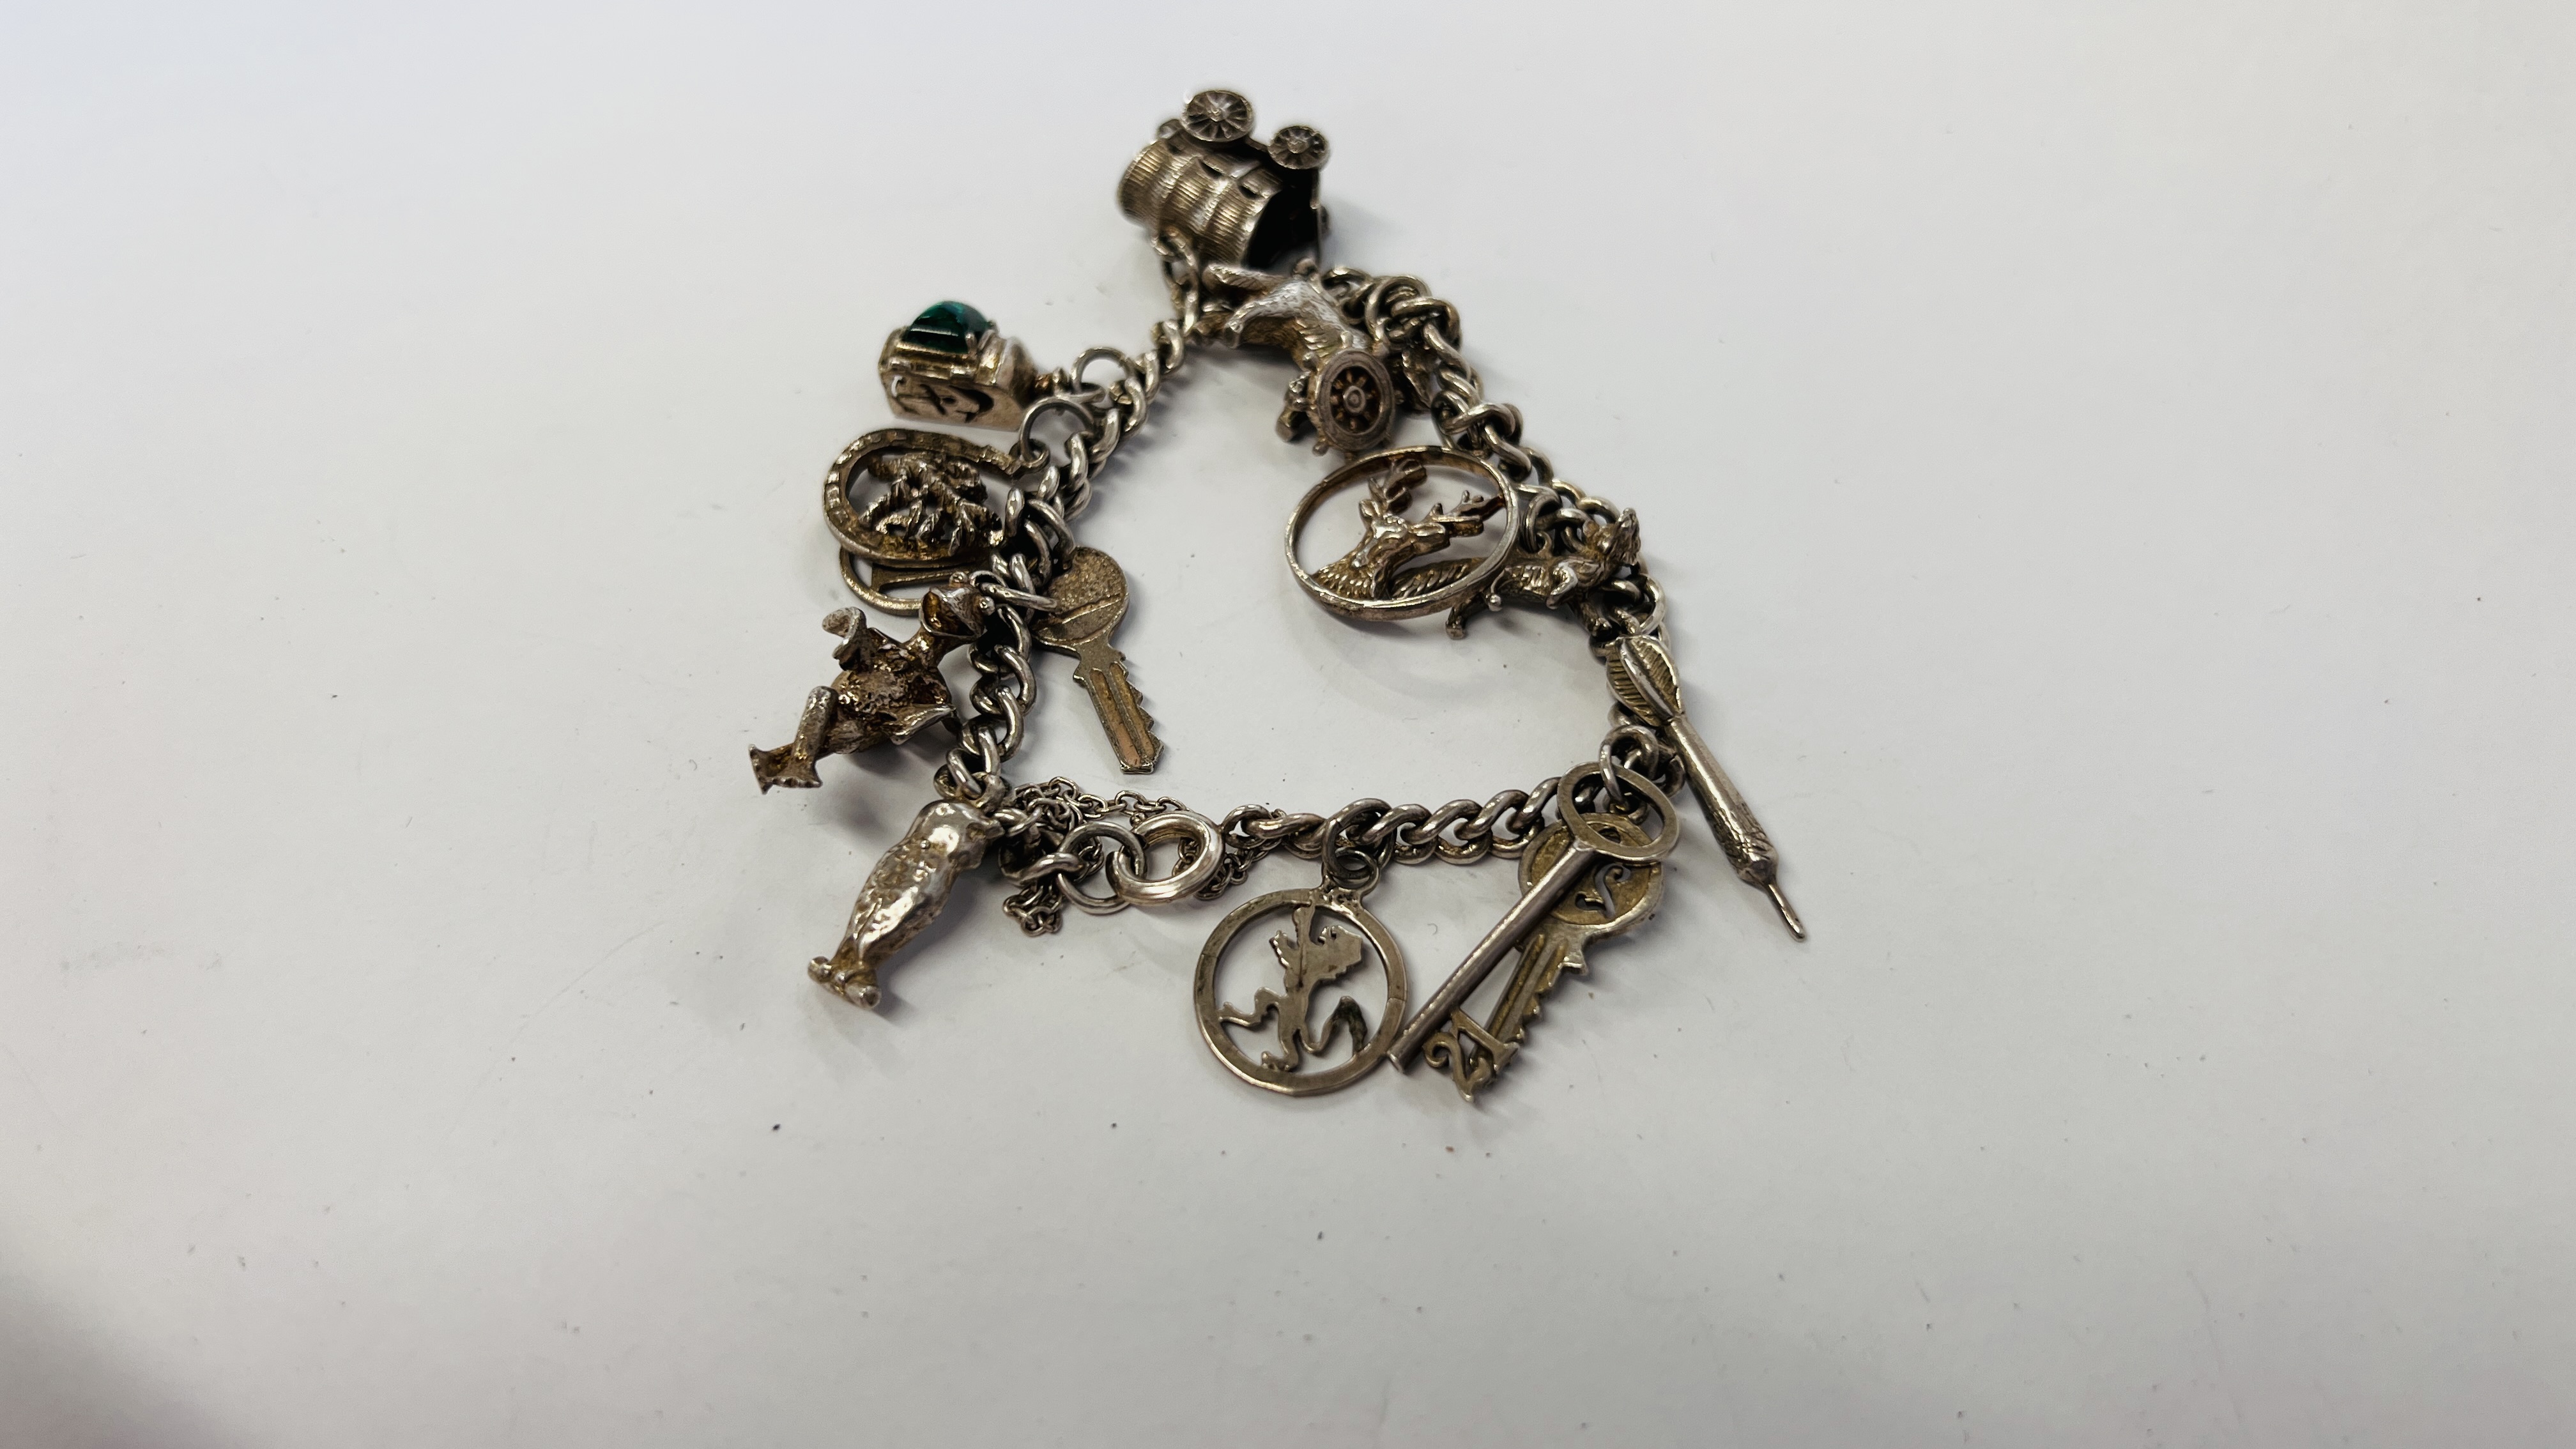 VINTAGE 925 SILVER BRACELET WITH 13 CHARMS ATTACHED. - Image 4 of 6